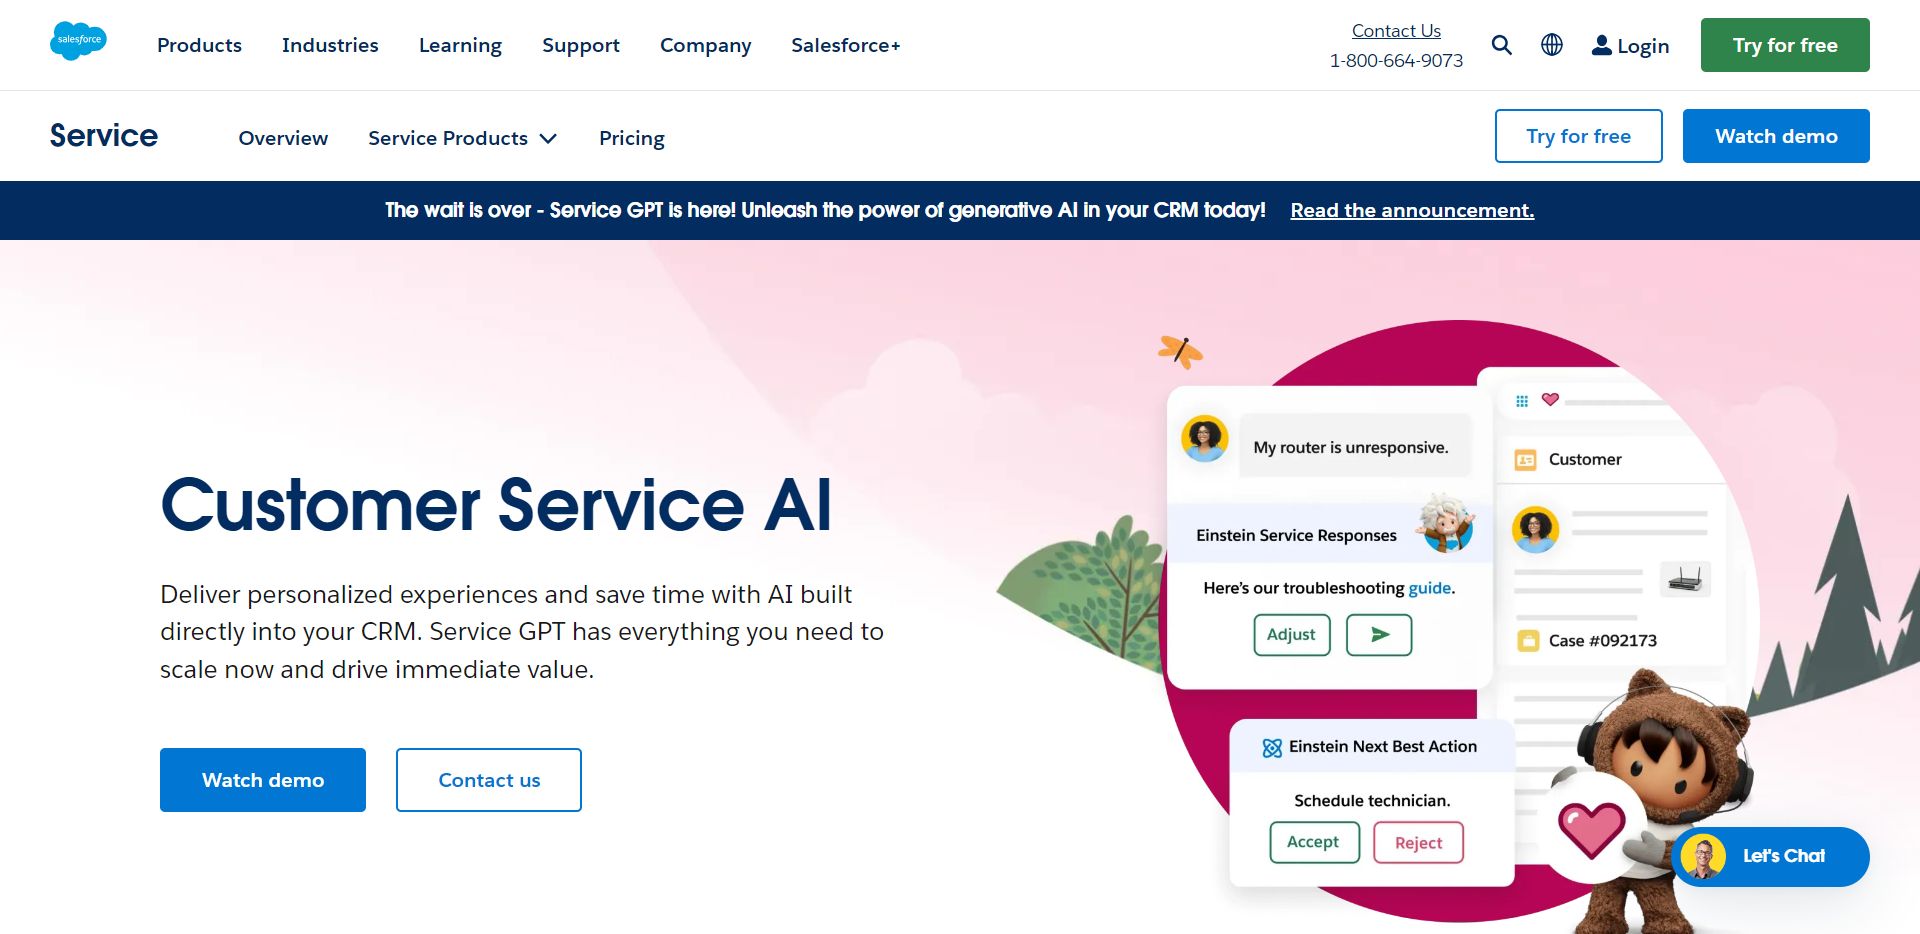 How does Salesforce use artificial intelligence to transform businesses?